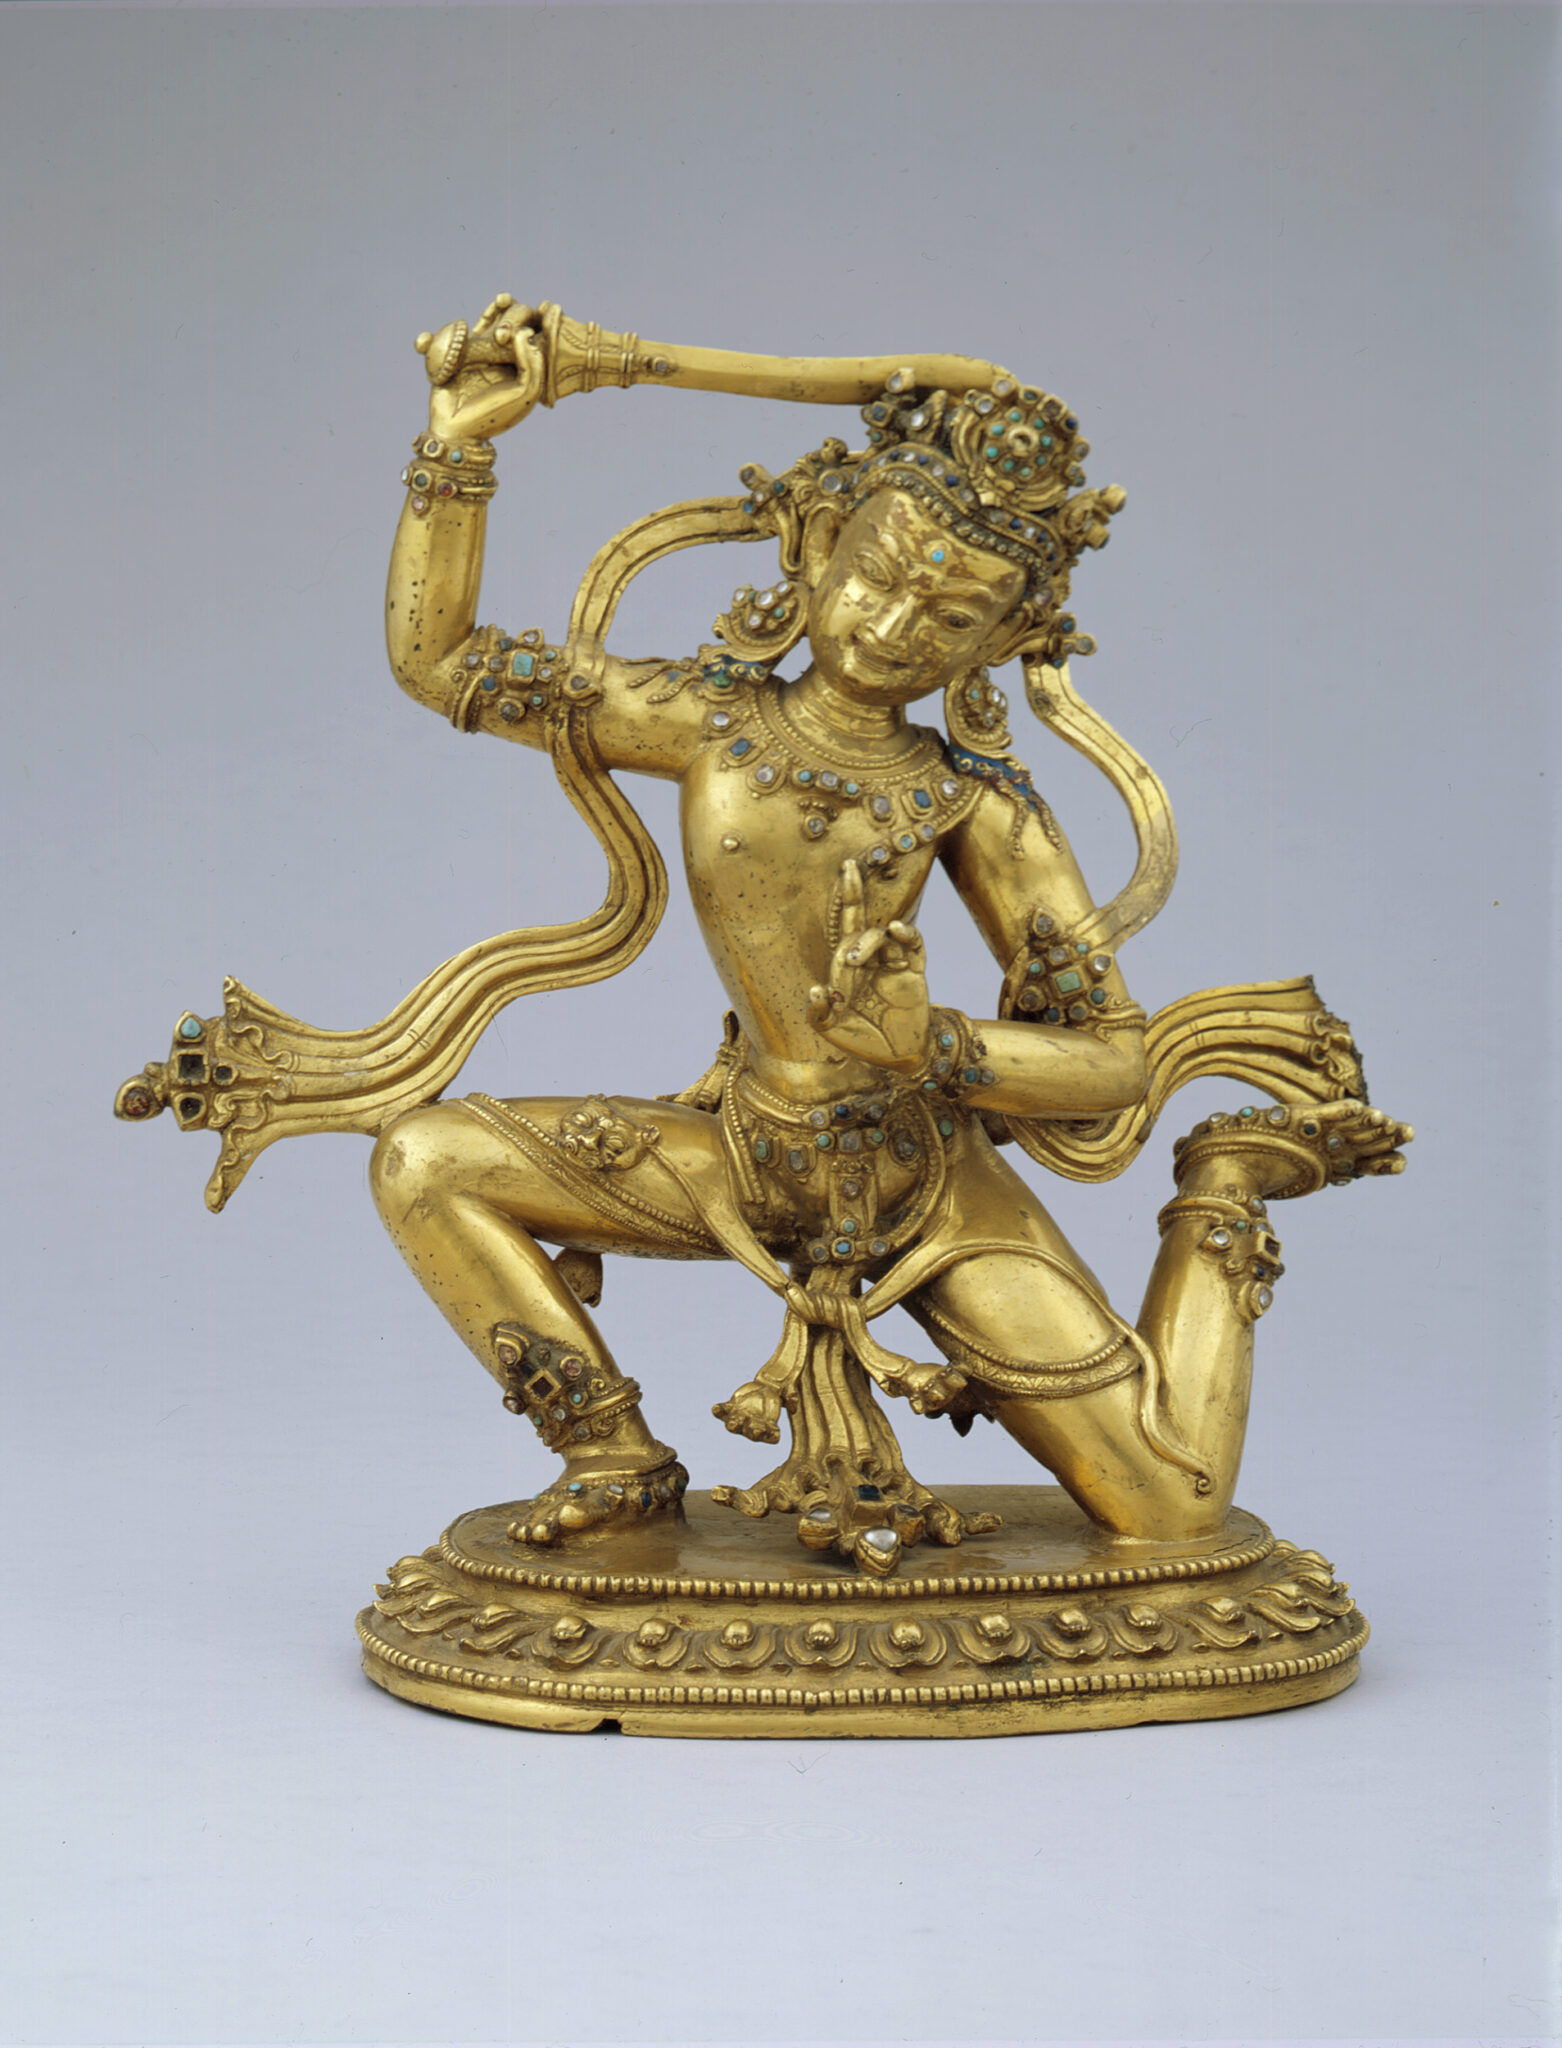 Golden statuette of kneeling deity with right foot upturned and sword held aloft in left hand, sash flowing about shoulders